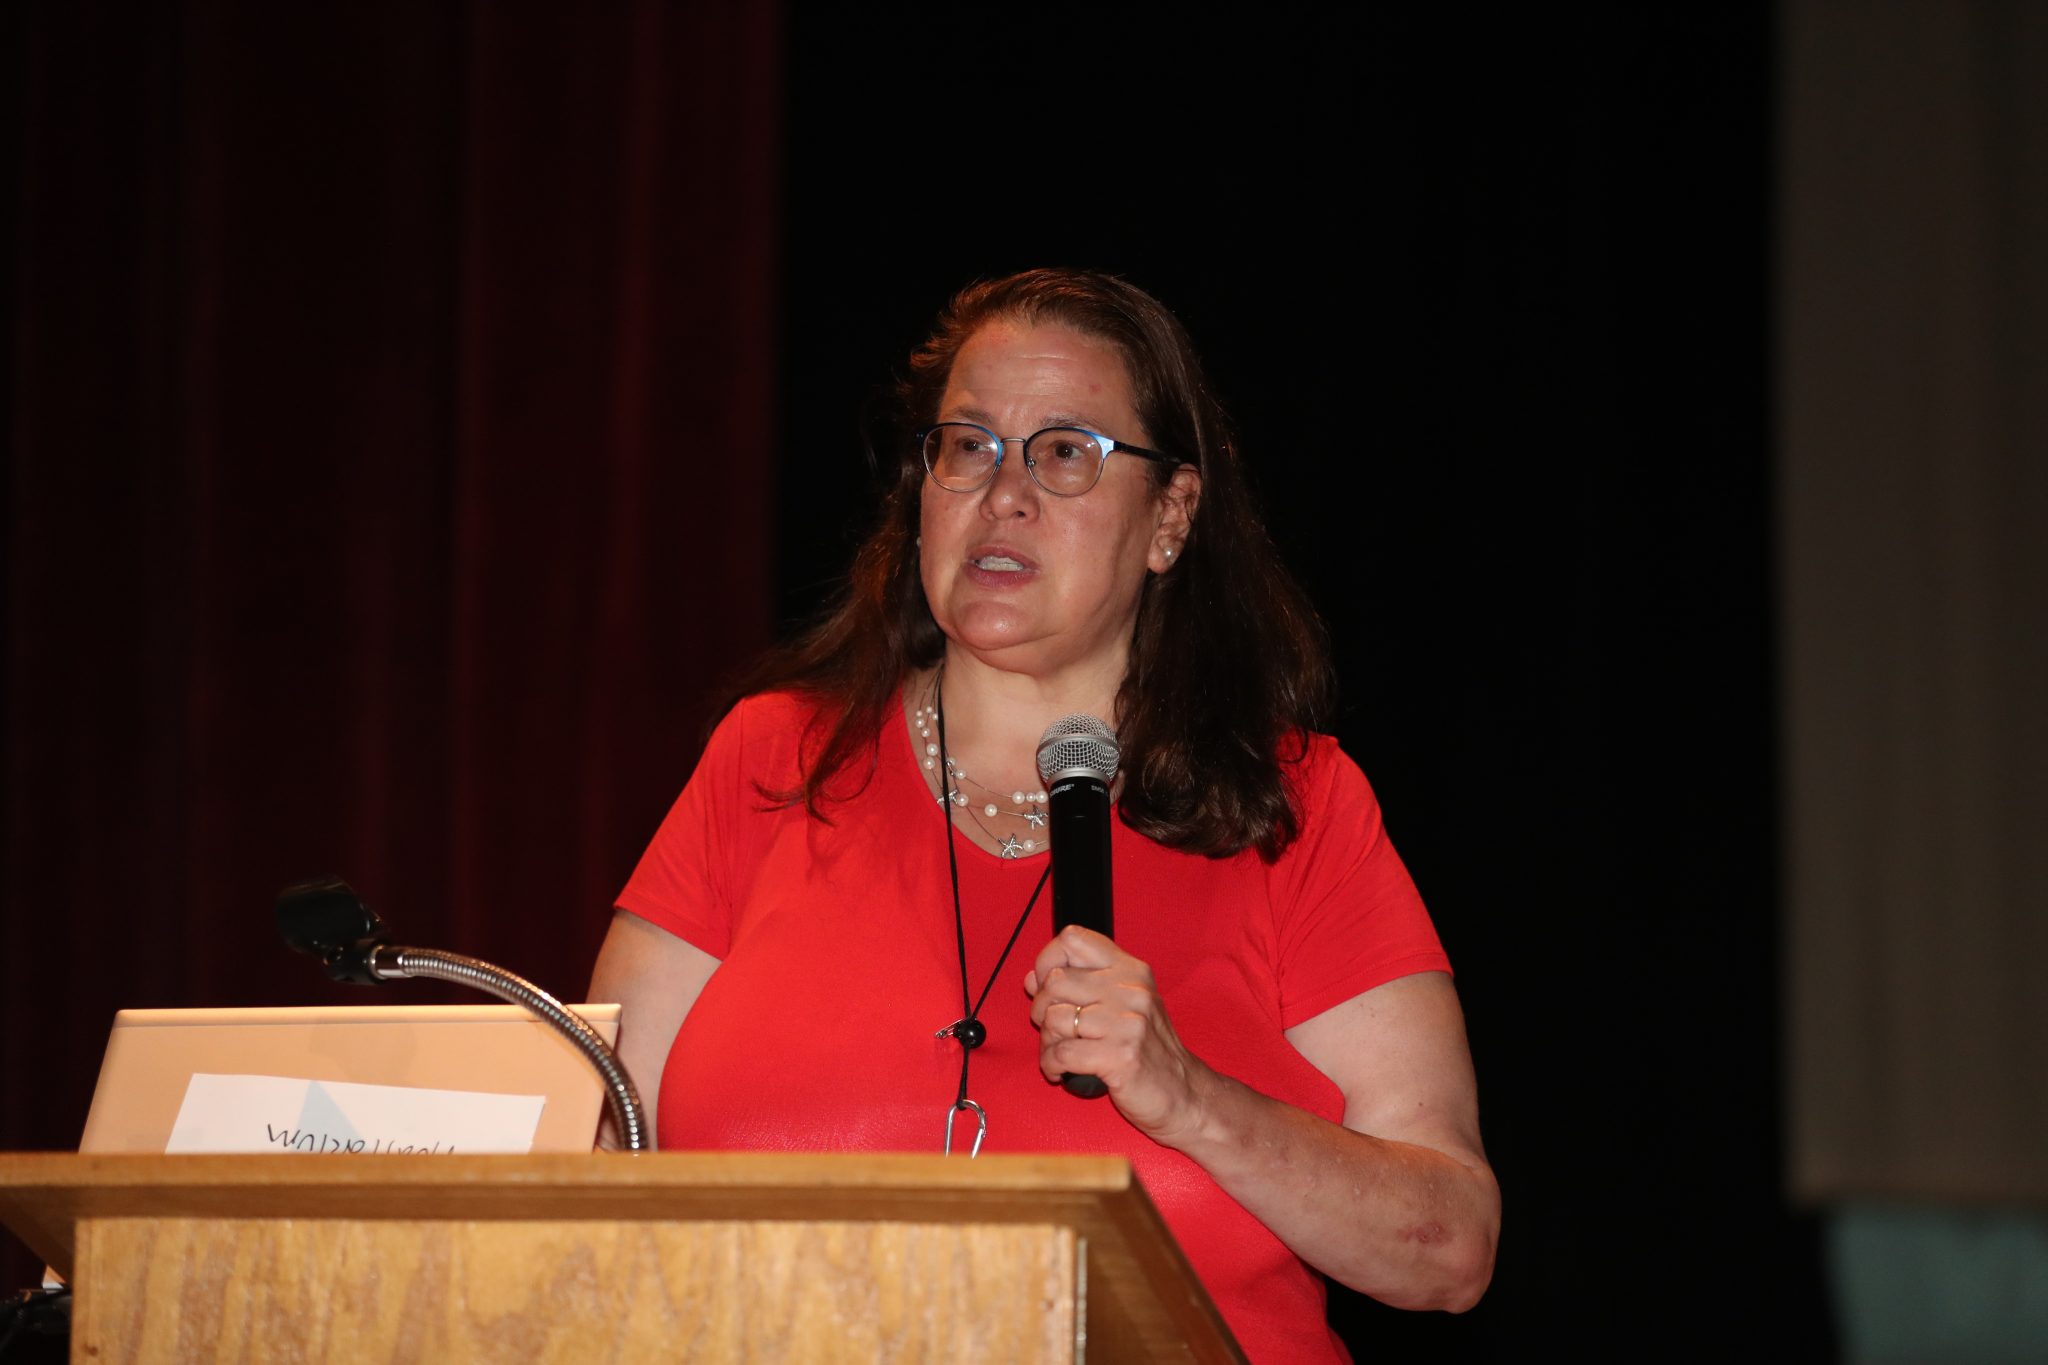 Co-president of the HEA June Gustafson, who is stepping down from her leadership position after this year, thanked her fellow teachers for their support.